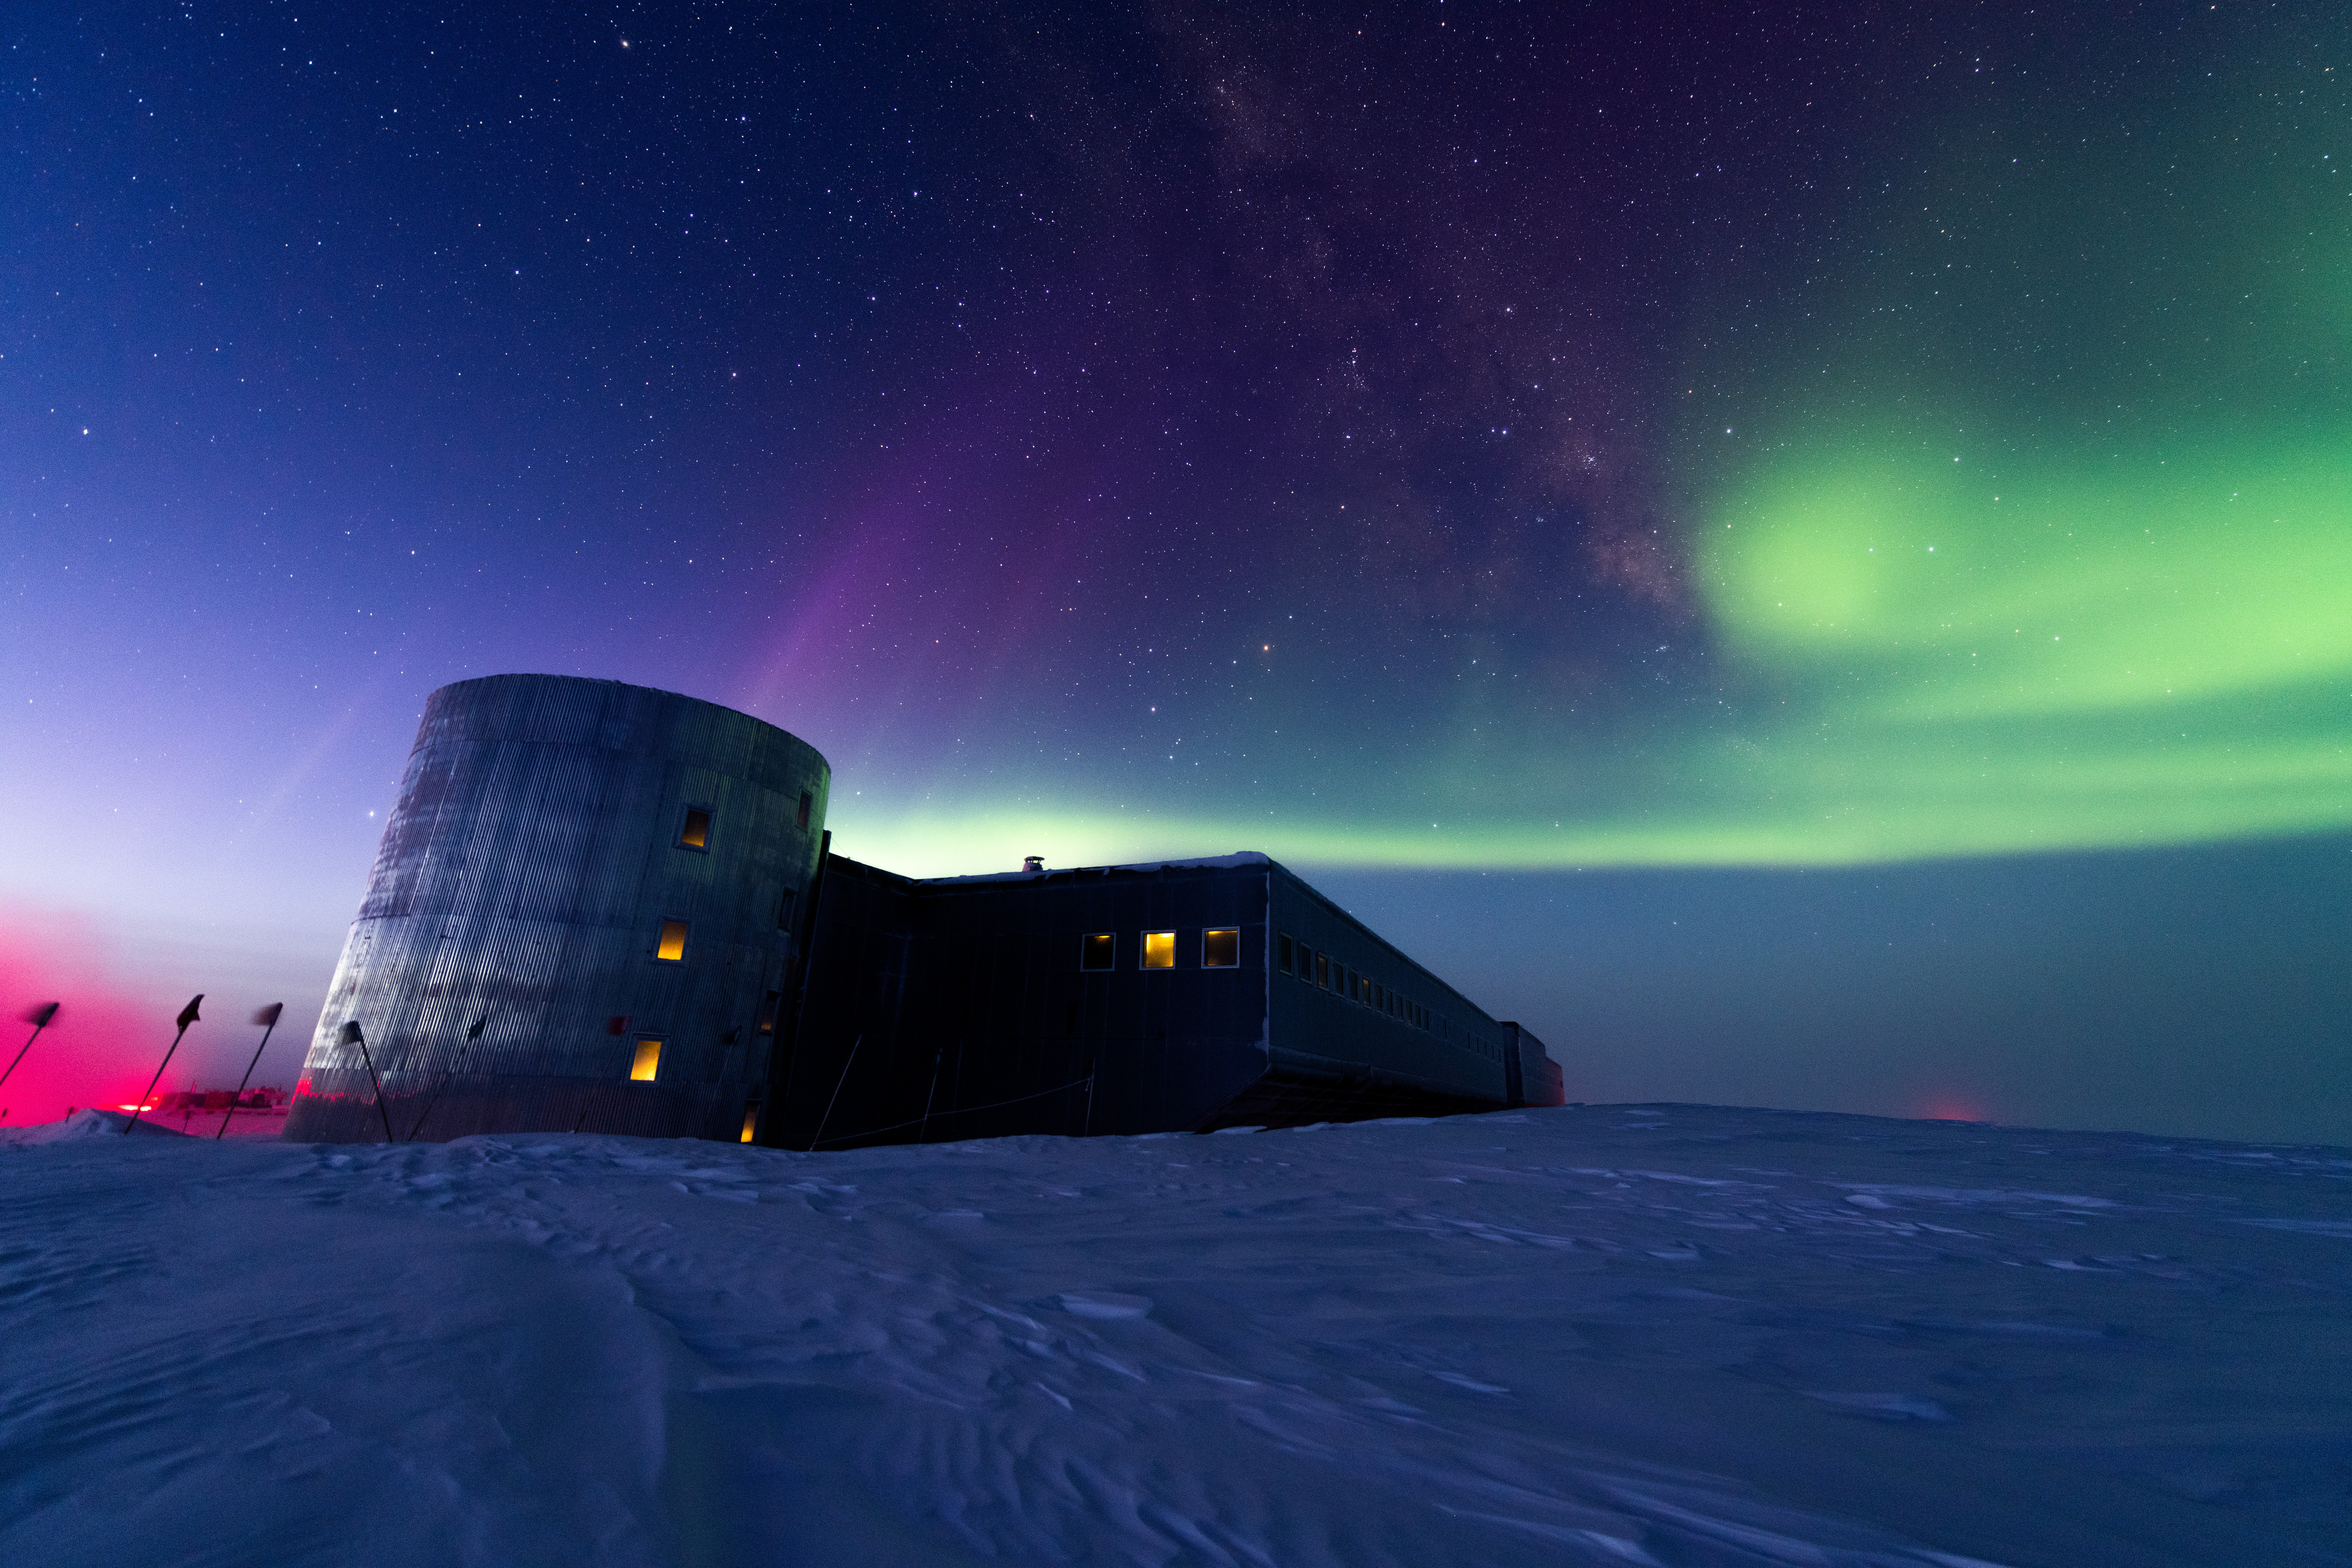 an icy landscape, a building, and green auroras in the night sky. 
